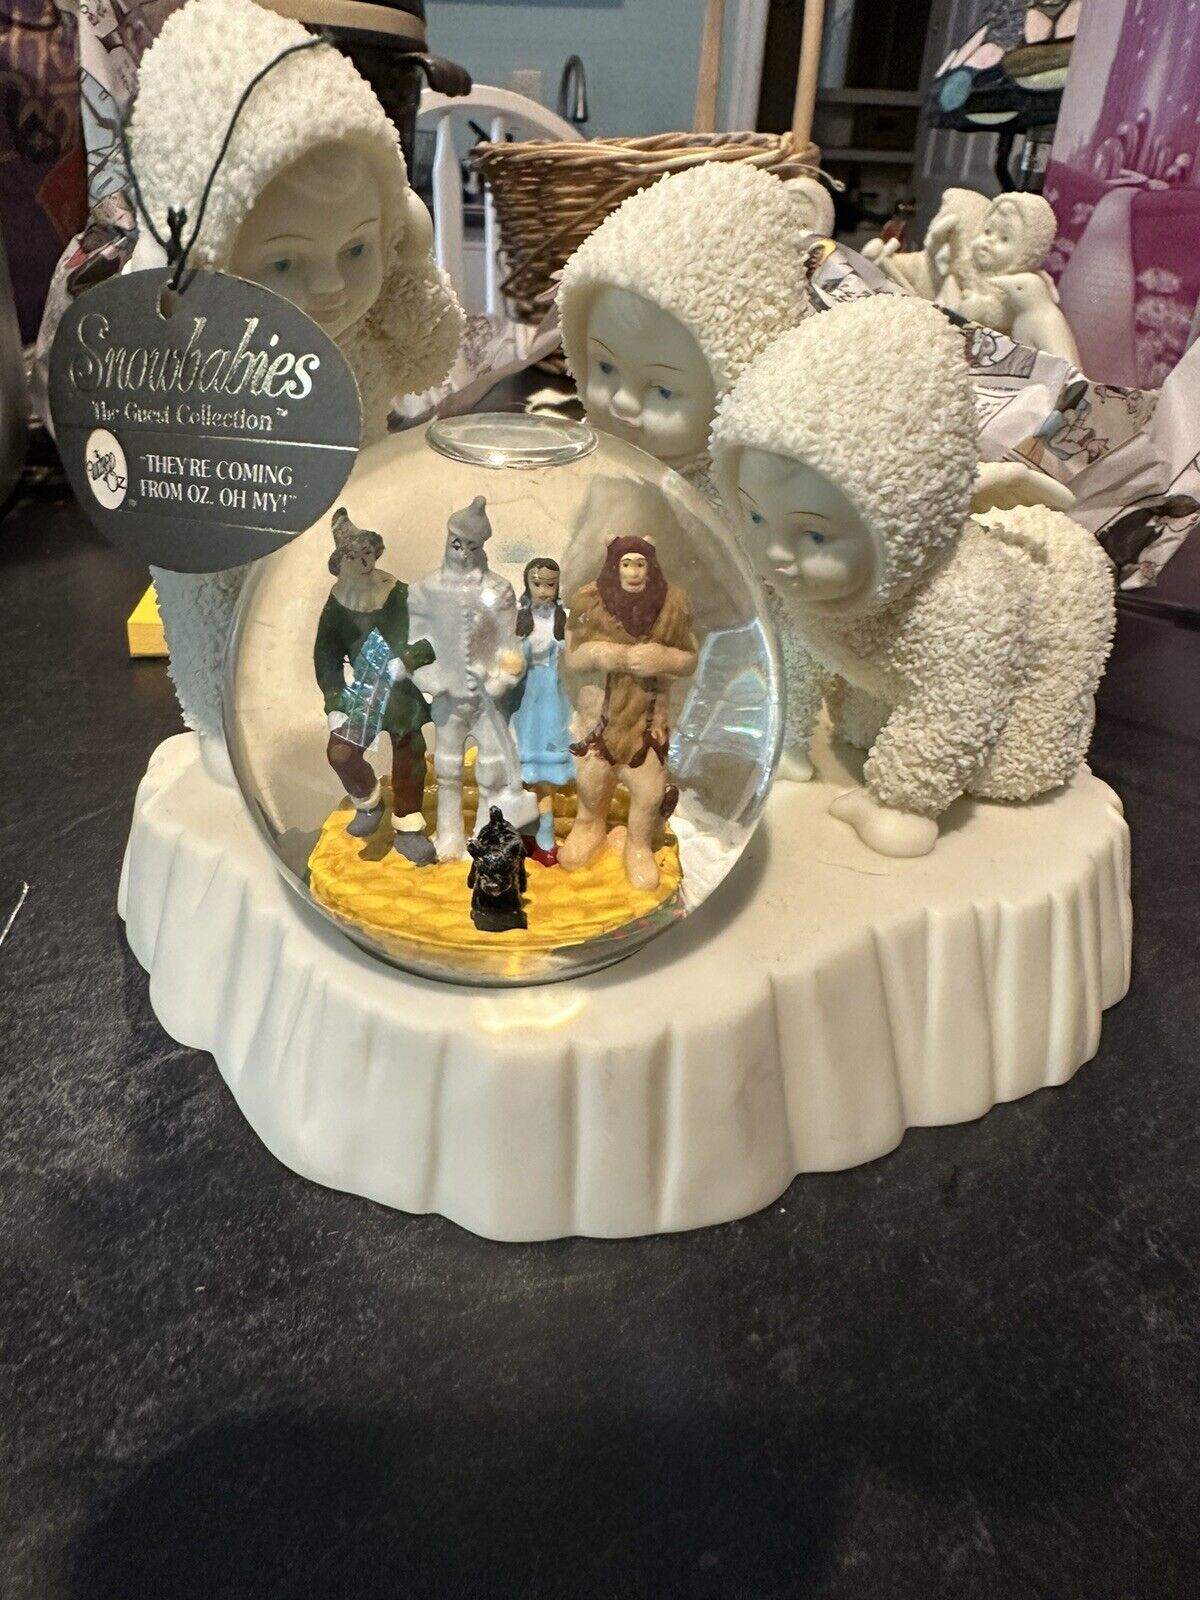 Rare Snowbabies Wizard of Oz Snowglobe They\'re Coming From Oz Depart 56 New 2008